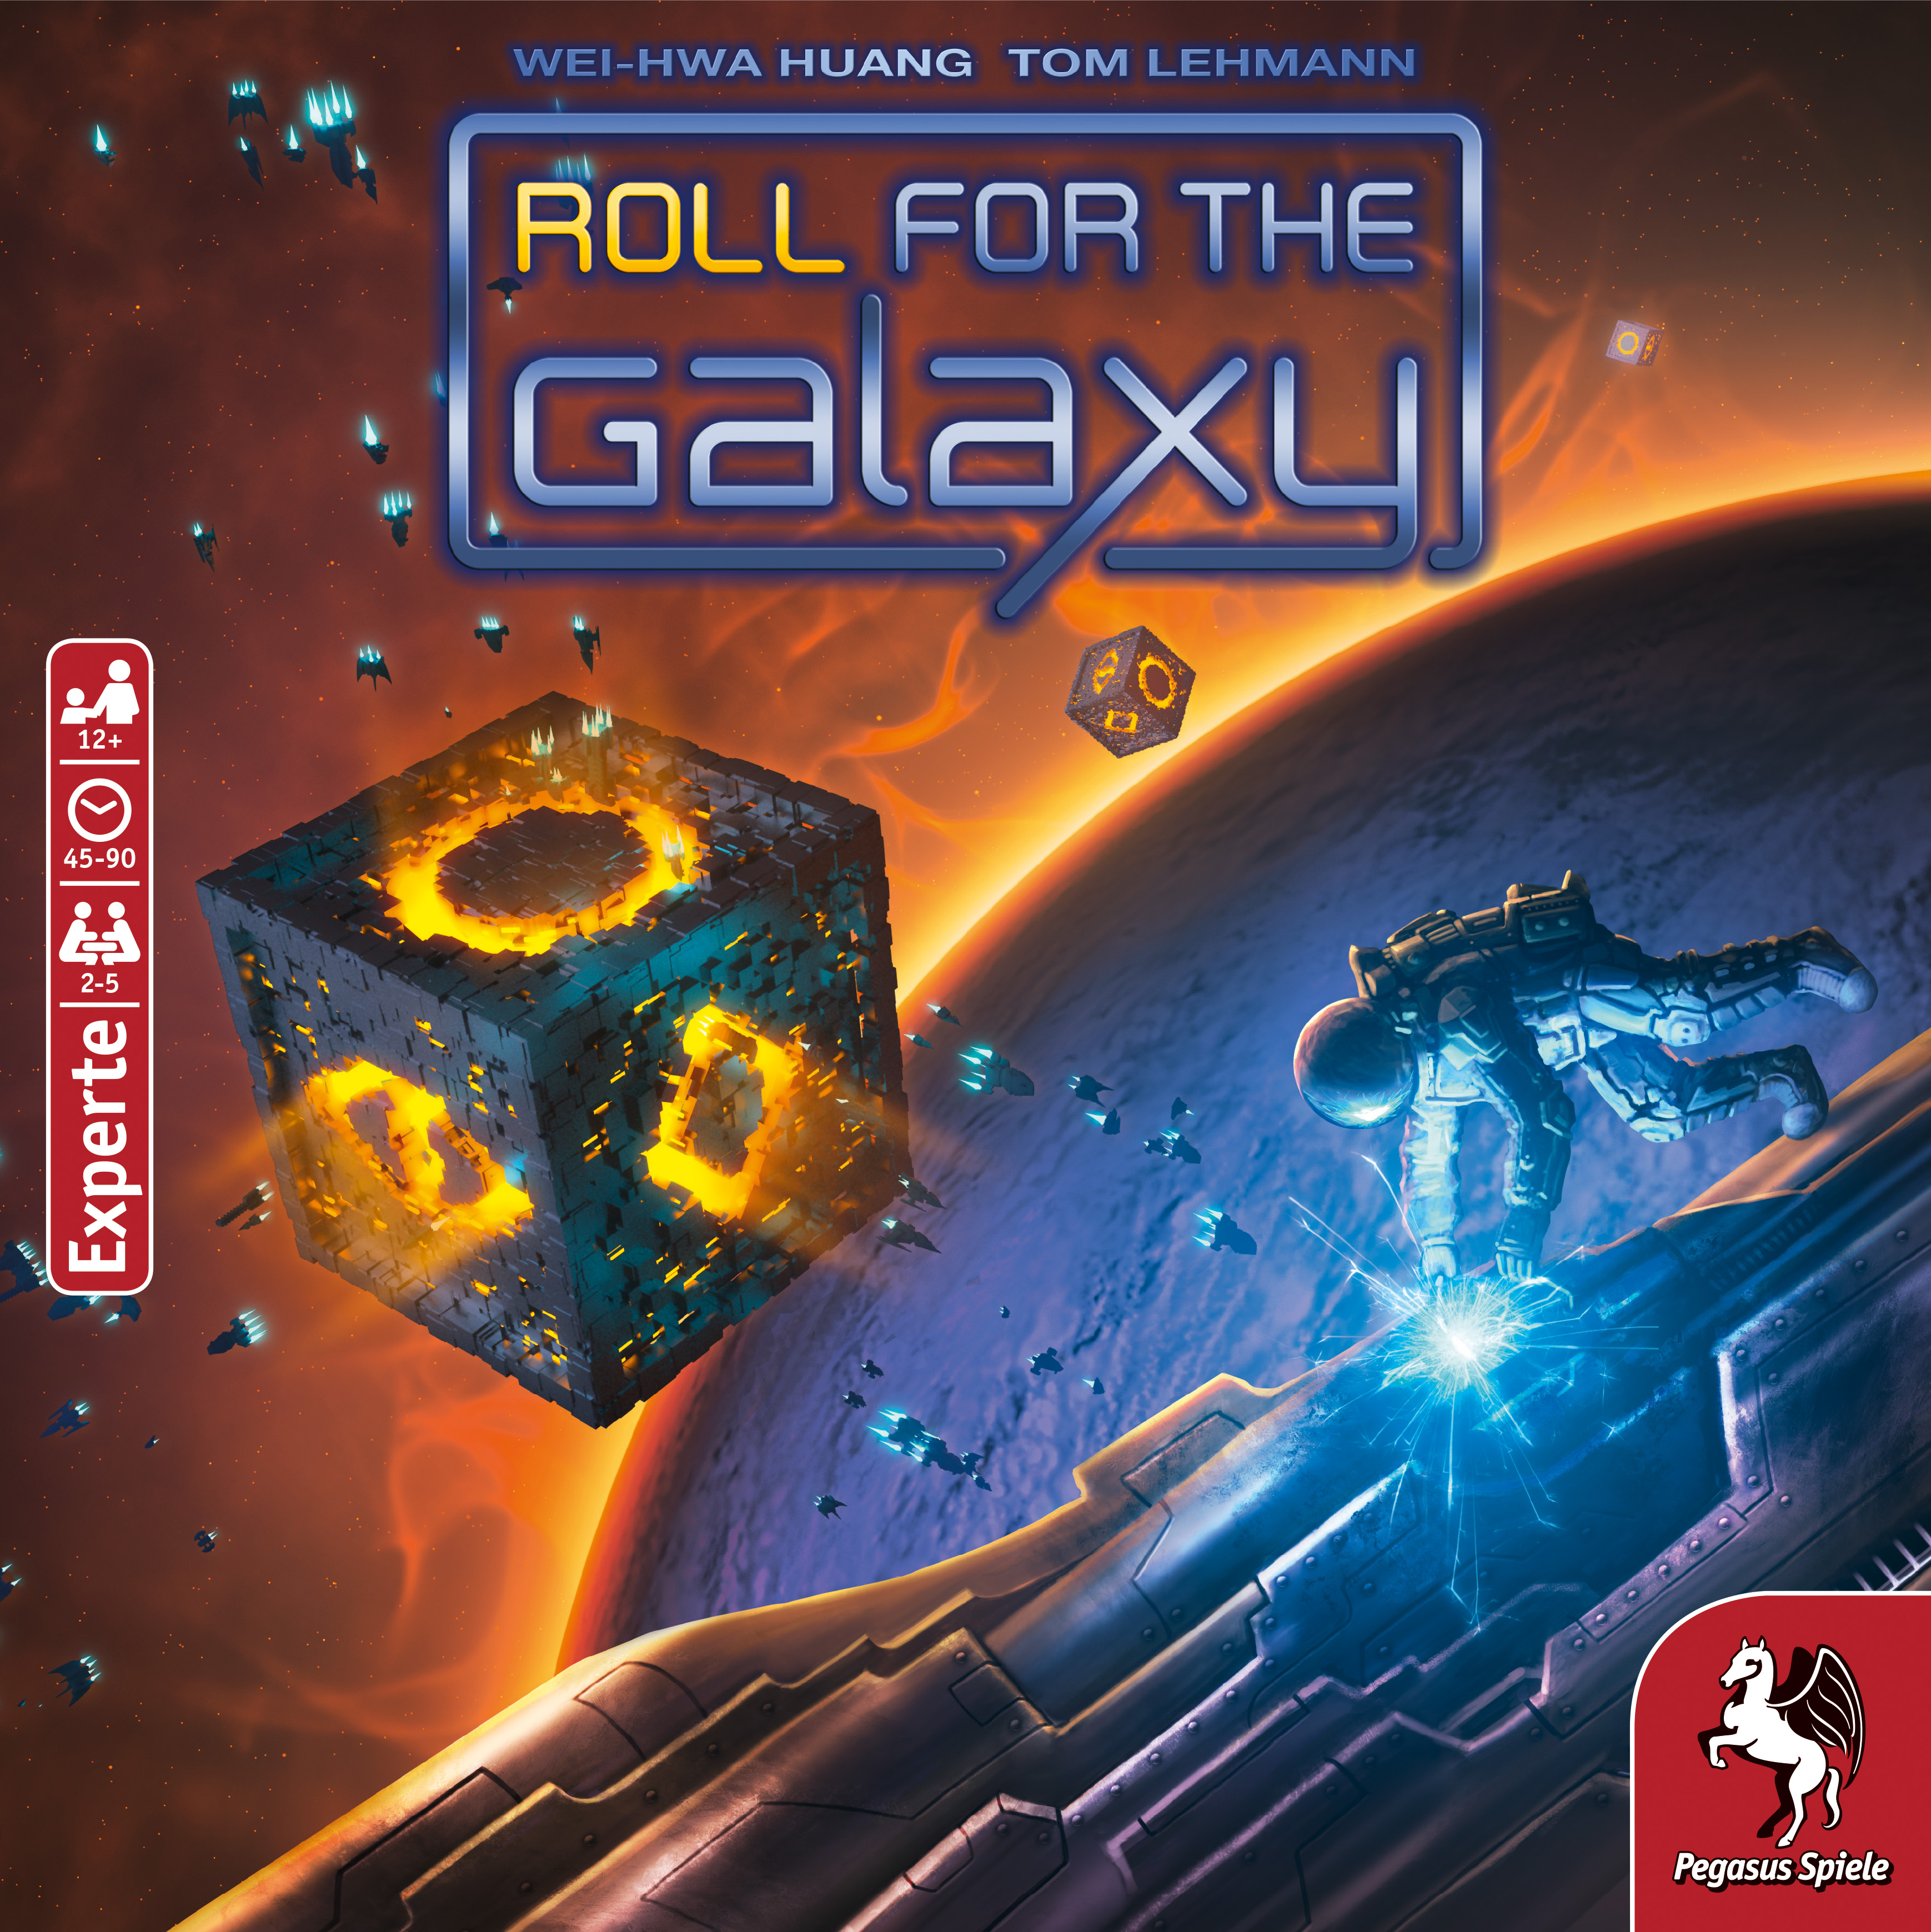 Roll for the Galaxy Cover - Pegasus Spiele